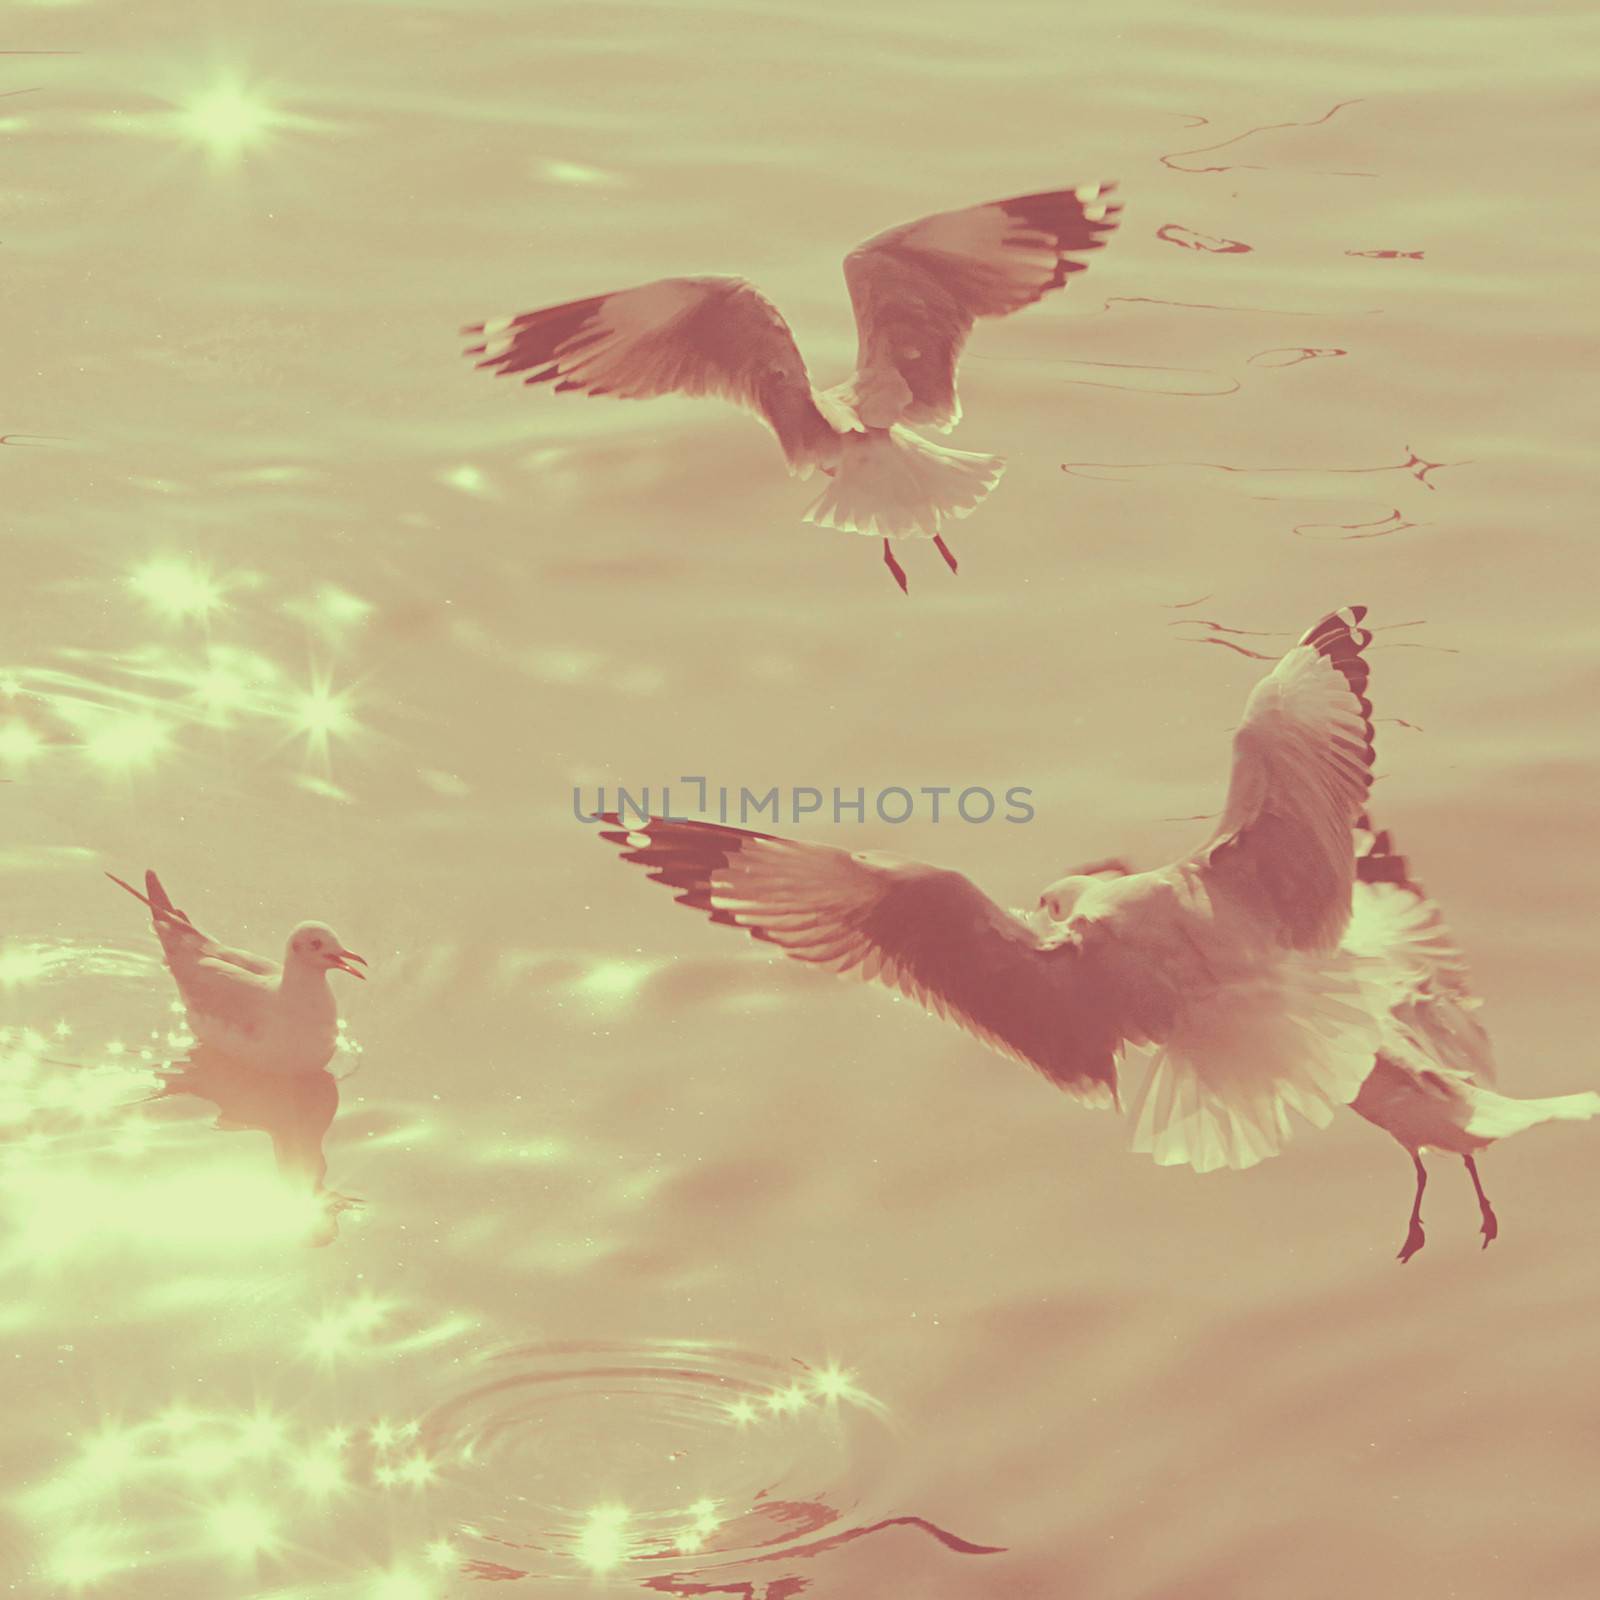 Seagulls over the sea with retro filter effect